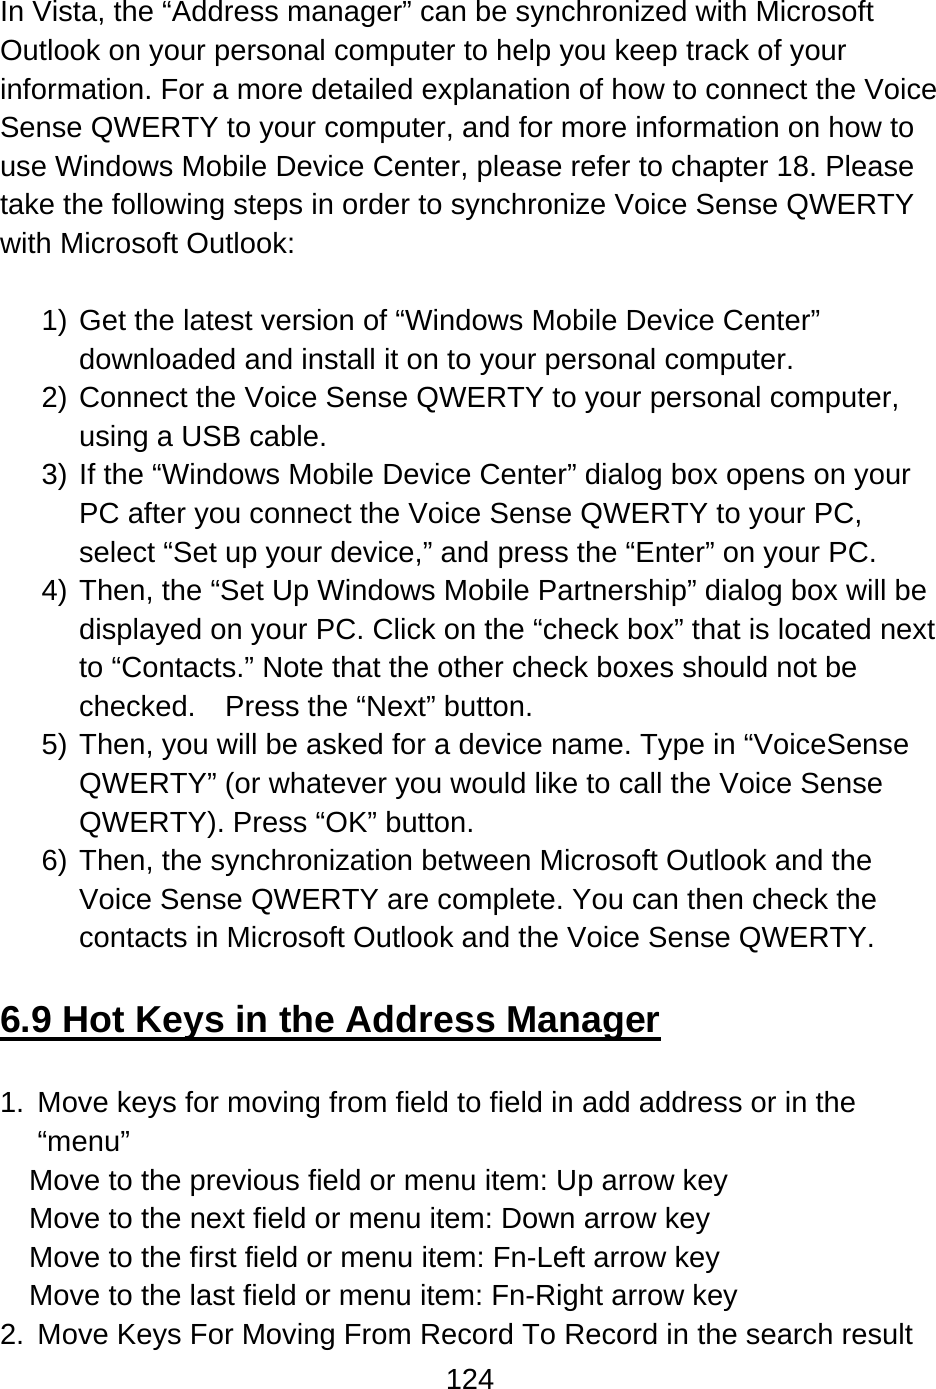 124   In Vista, the “Address manager” can be synchronized with Microsoft Outlook on your personal computer to help you keep track of your information. For a more detailed explanation of how to connect the Voice Sense QWERTY to your computer, and for more information on how to use Windows Mobile Device Center, please refer to chapter 18. Please take the following steps in order to synchronize Voice Sense QWERTY with Microsoft Outlook:  1) Get the latest version of “Windows Mobile Device Center” downloaded and install it on to your personal computer. 2) Connect the Voice Sense QWERTY to your personal computer, using a USB cable. 3) If the “Windows Mobile Device Center” dialog box opens on your PC after you connect the Voice Sense QWERTY to your PC, select “Set up your device,” and press the “Enter” on your PC. 4) Then, the “Set Up Windows Mobile Partnership” dialog box will be displayed on your PC. Click on the “check box” that is located next to “Contacts.” Note that the other check boxes should not be checked.  Press the “Next” button. 5) Then, you will be asked for a device name. Type in “VoiceSense QWERTY” (or whatever you would like to call the Voice Sense QWERTY). Press “OK” button. 6) Then, the synchronization between Microsoft Outlook and the Voice Sense QWERTY are complete. You can then check the contacts in Microsoft Outlook and the Voice Sense QWERTY.  6.9 Hot Keys in the Address Manager  1.  Move keys for moving from field to field in add address or in the “menu” Move to the previous field or menu item: Up arrow key   Move to the next field or menu item: Down arrow key   Move to the first field or menu item: Fn-Left arrow key Move to the last field or menu item: Fn-Right arrow key 2.  Move Keys For Moving From Record To Record in the search result 